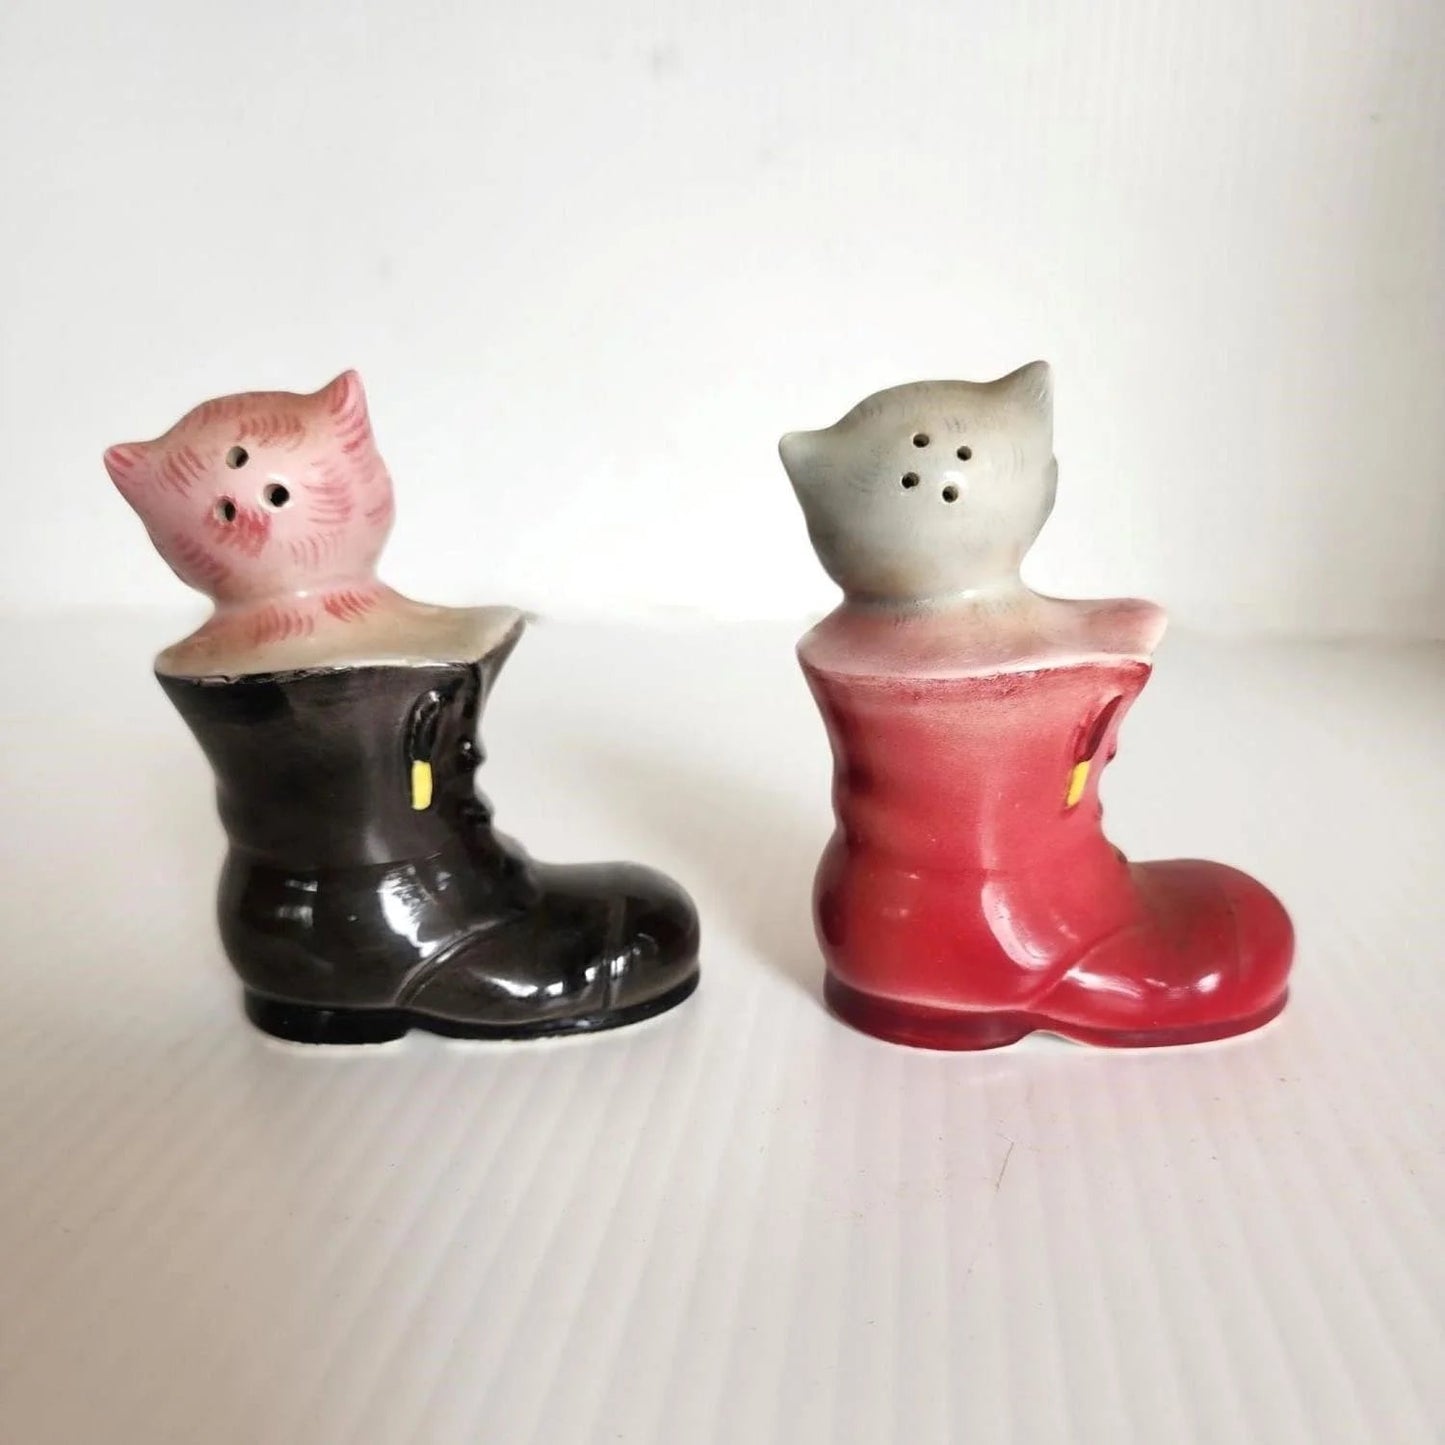 Two ceramic cat figurines sitting in boots, showcasing a charming and whimsical display of feline companionship.